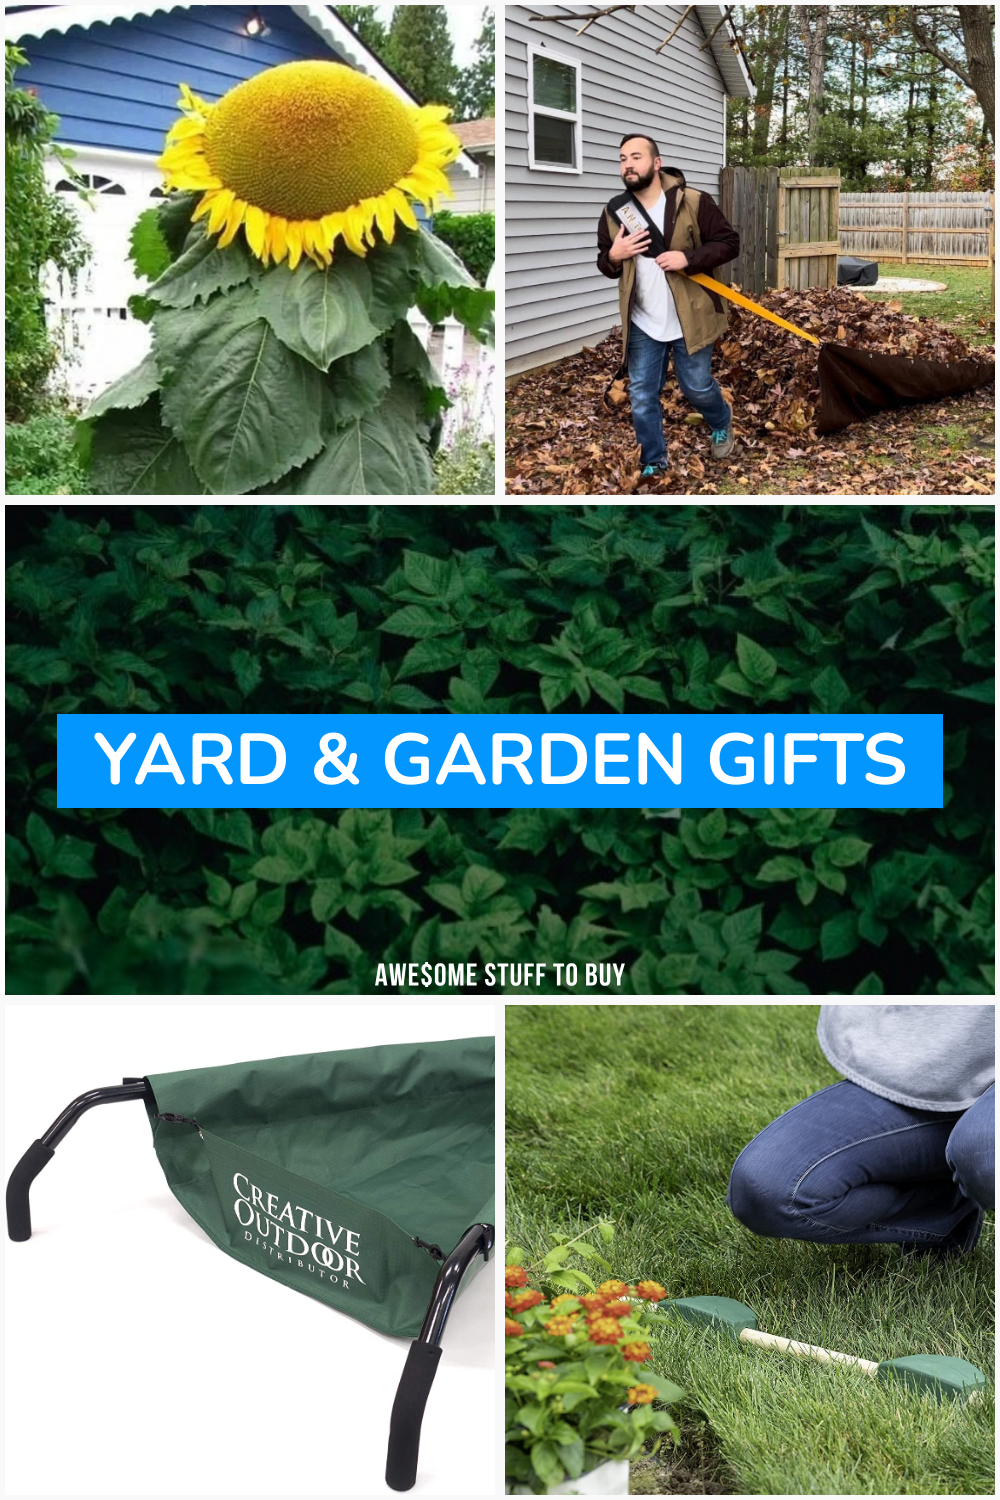 Yard & Garden Gifts // Awesome Stuff to Buy